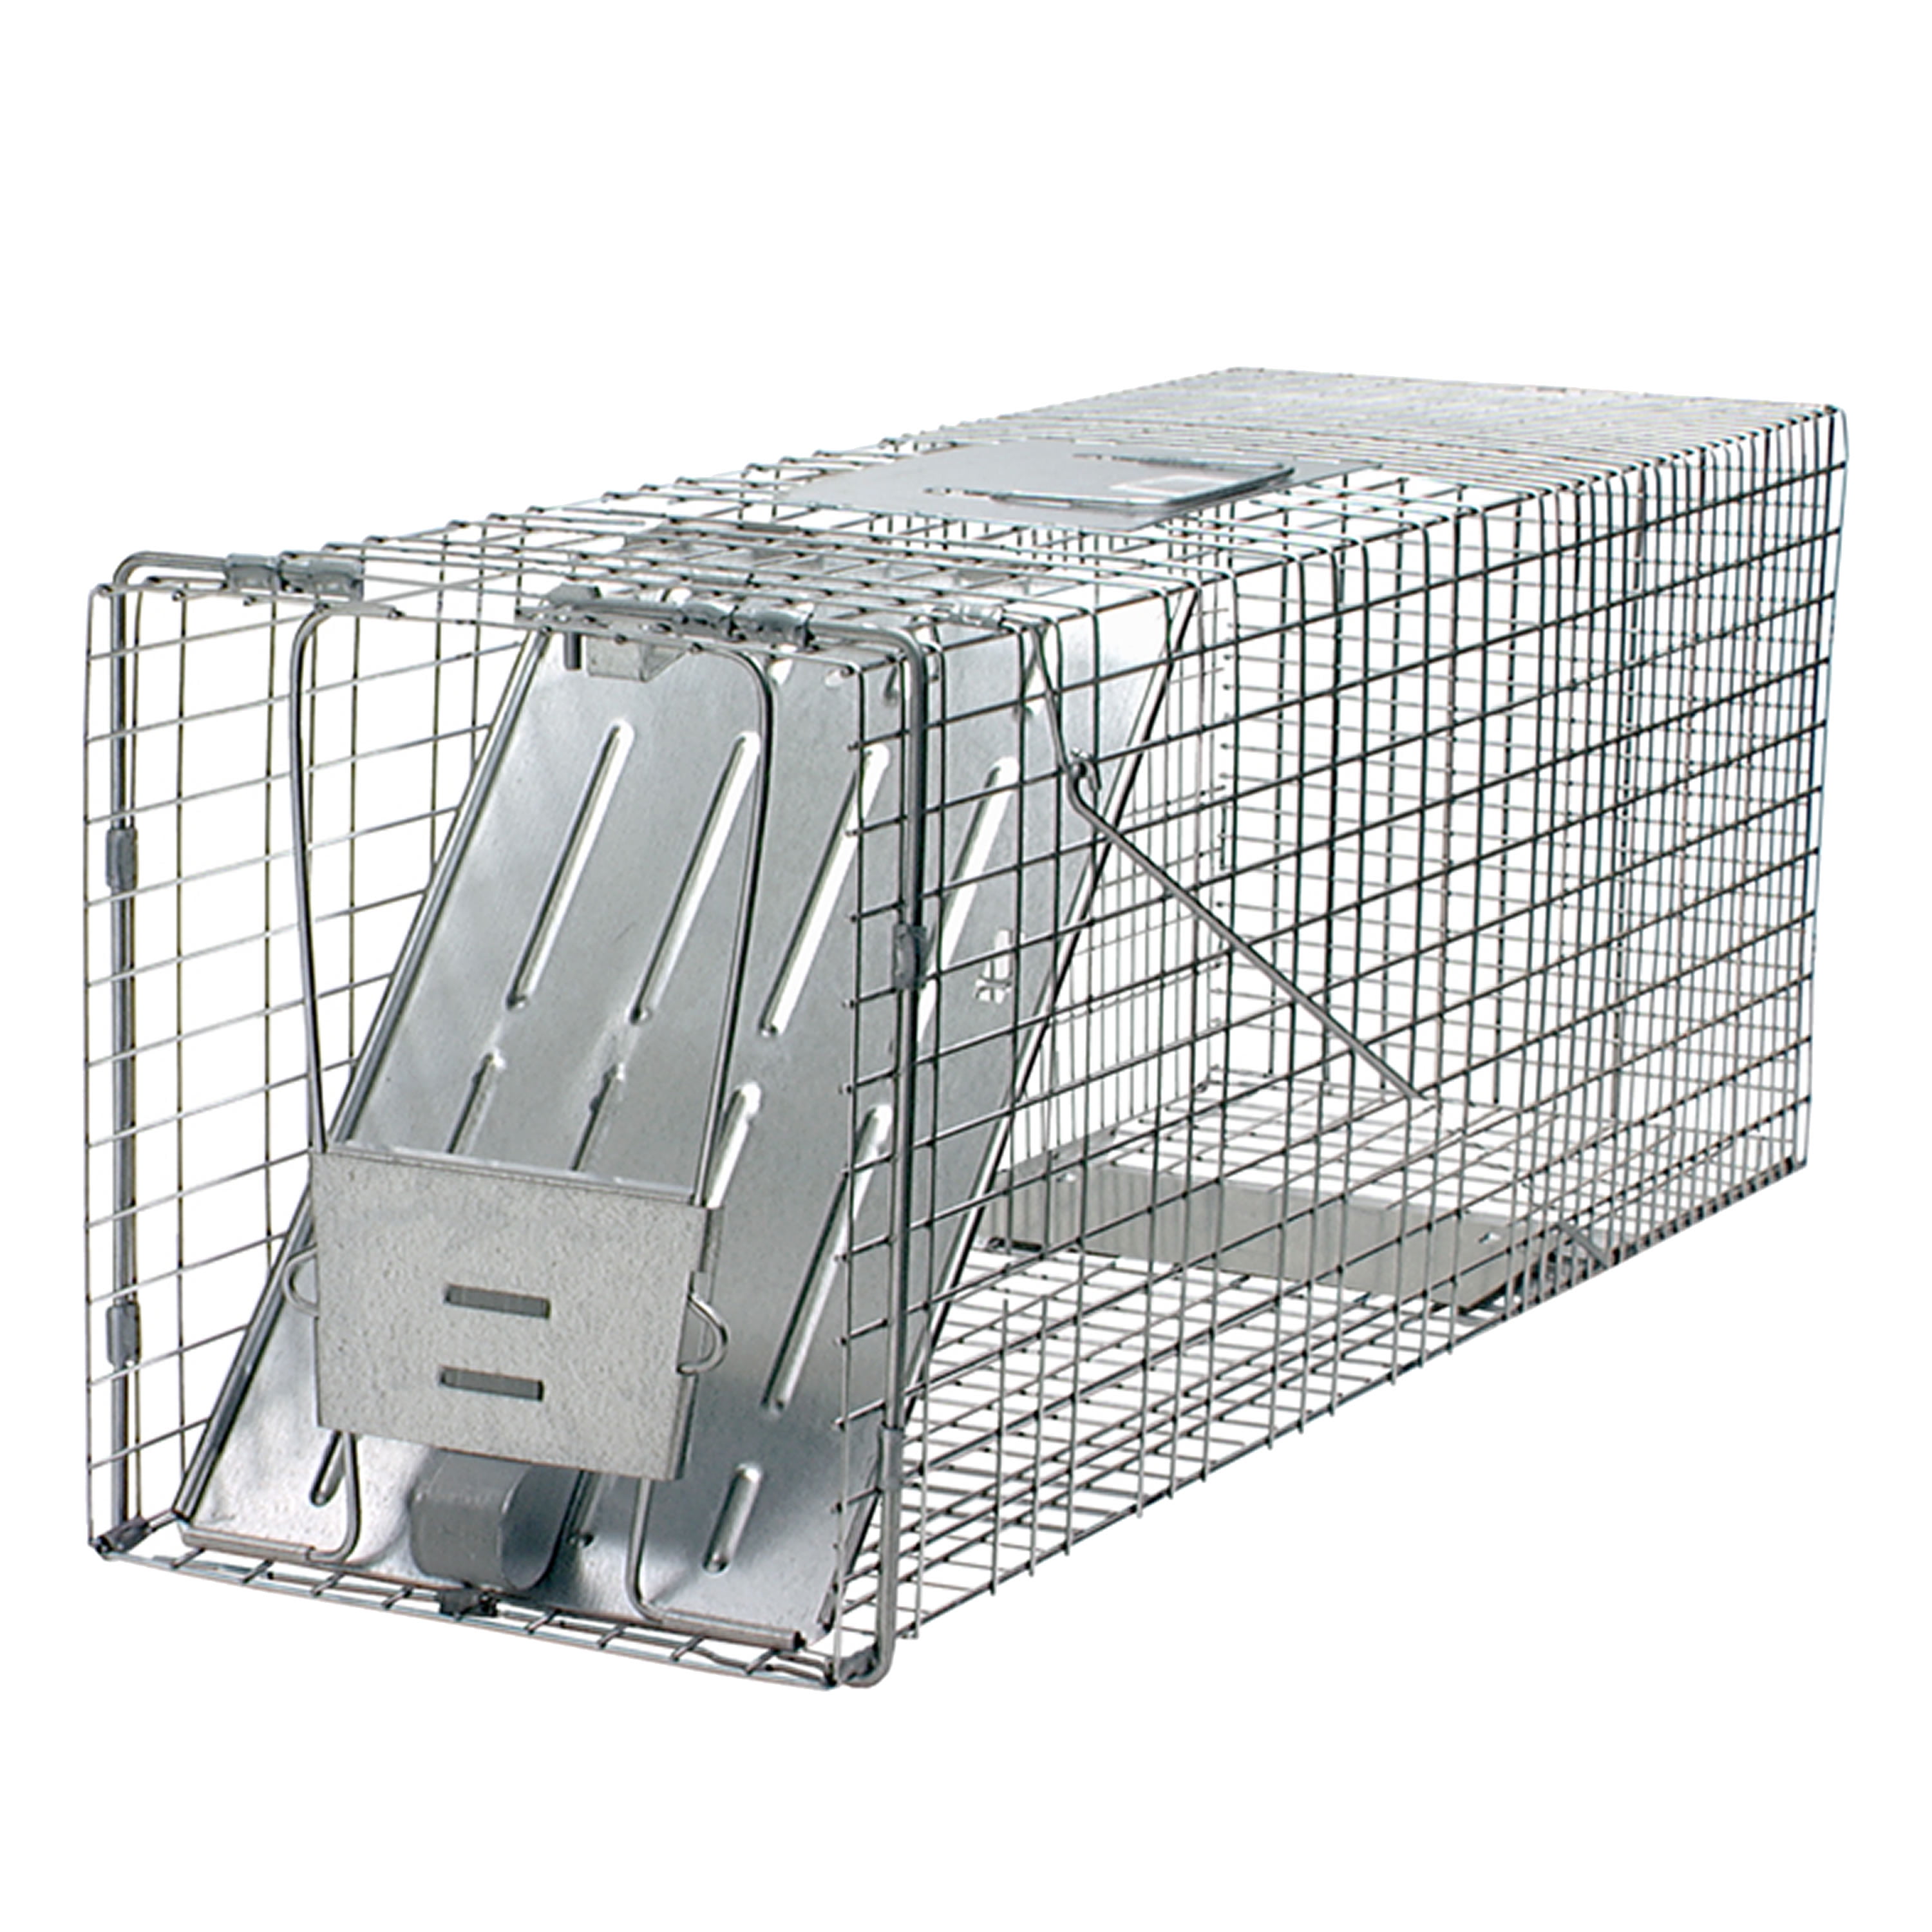 ZENY 32 inch Humane Live Animal Trap Cage for sale online 